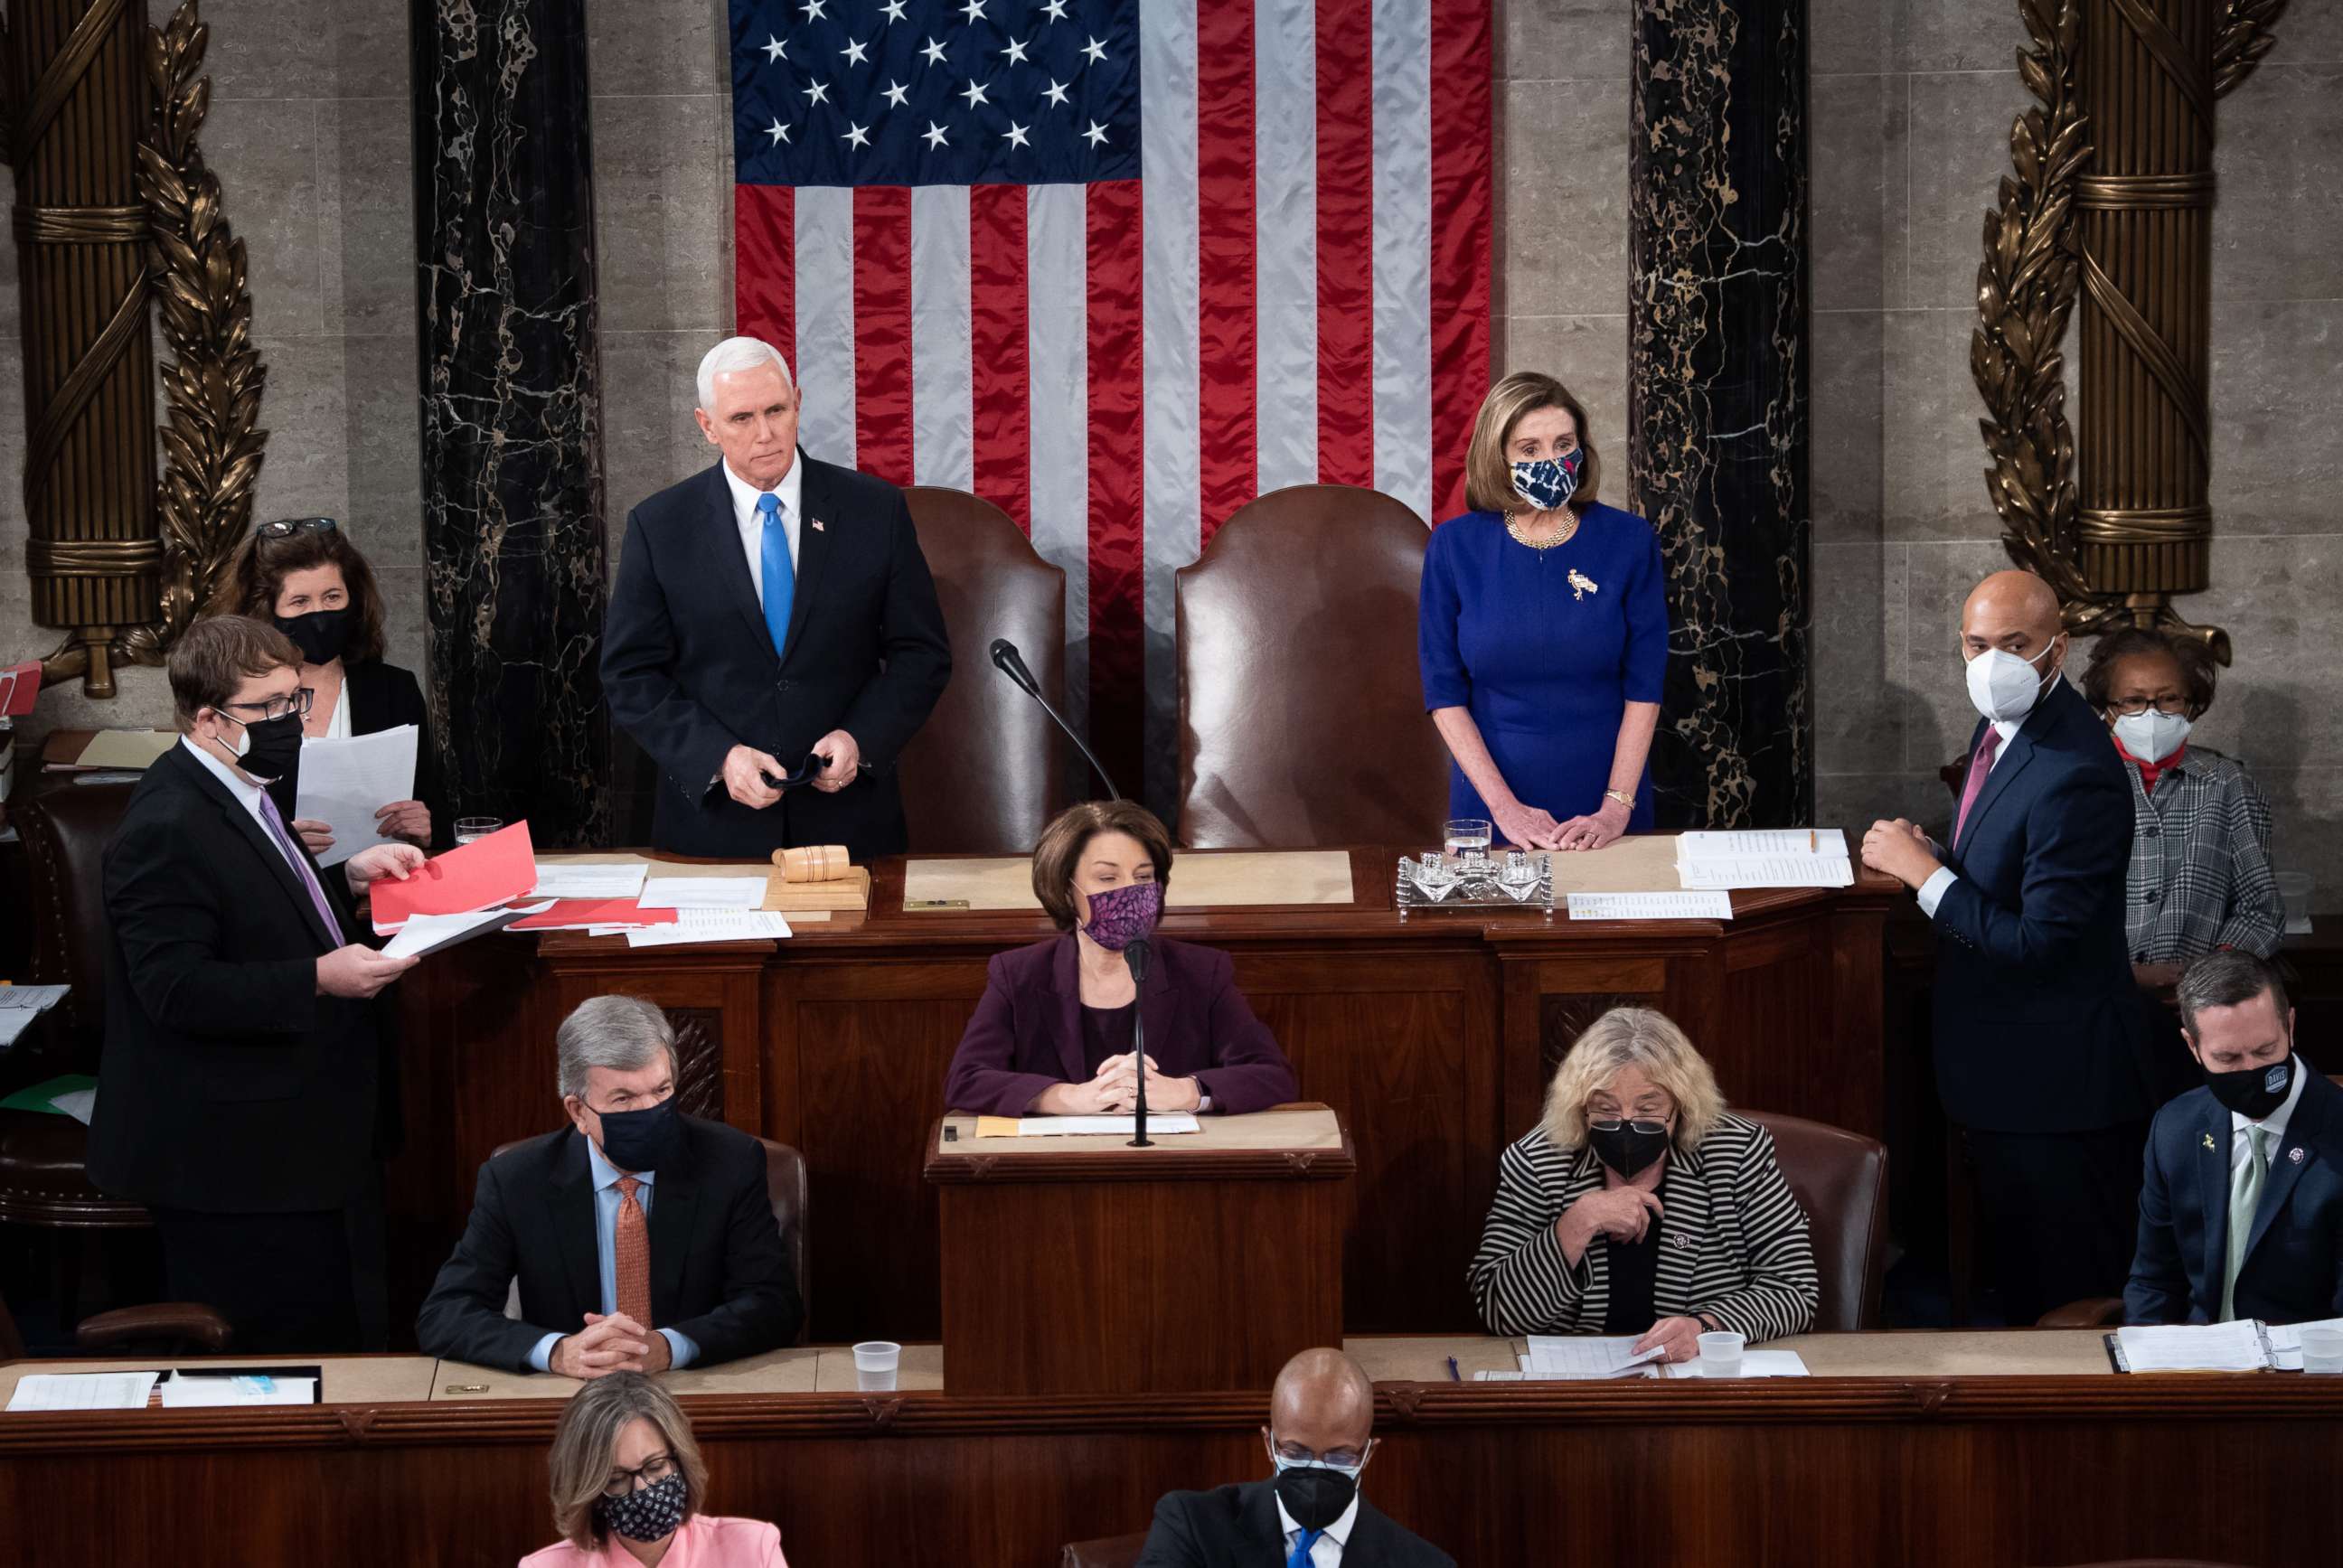 PHOTO: Vice President Mike Pence presides over a joint session of Congress on Jan. 06, 2021, in Washington, D.C.